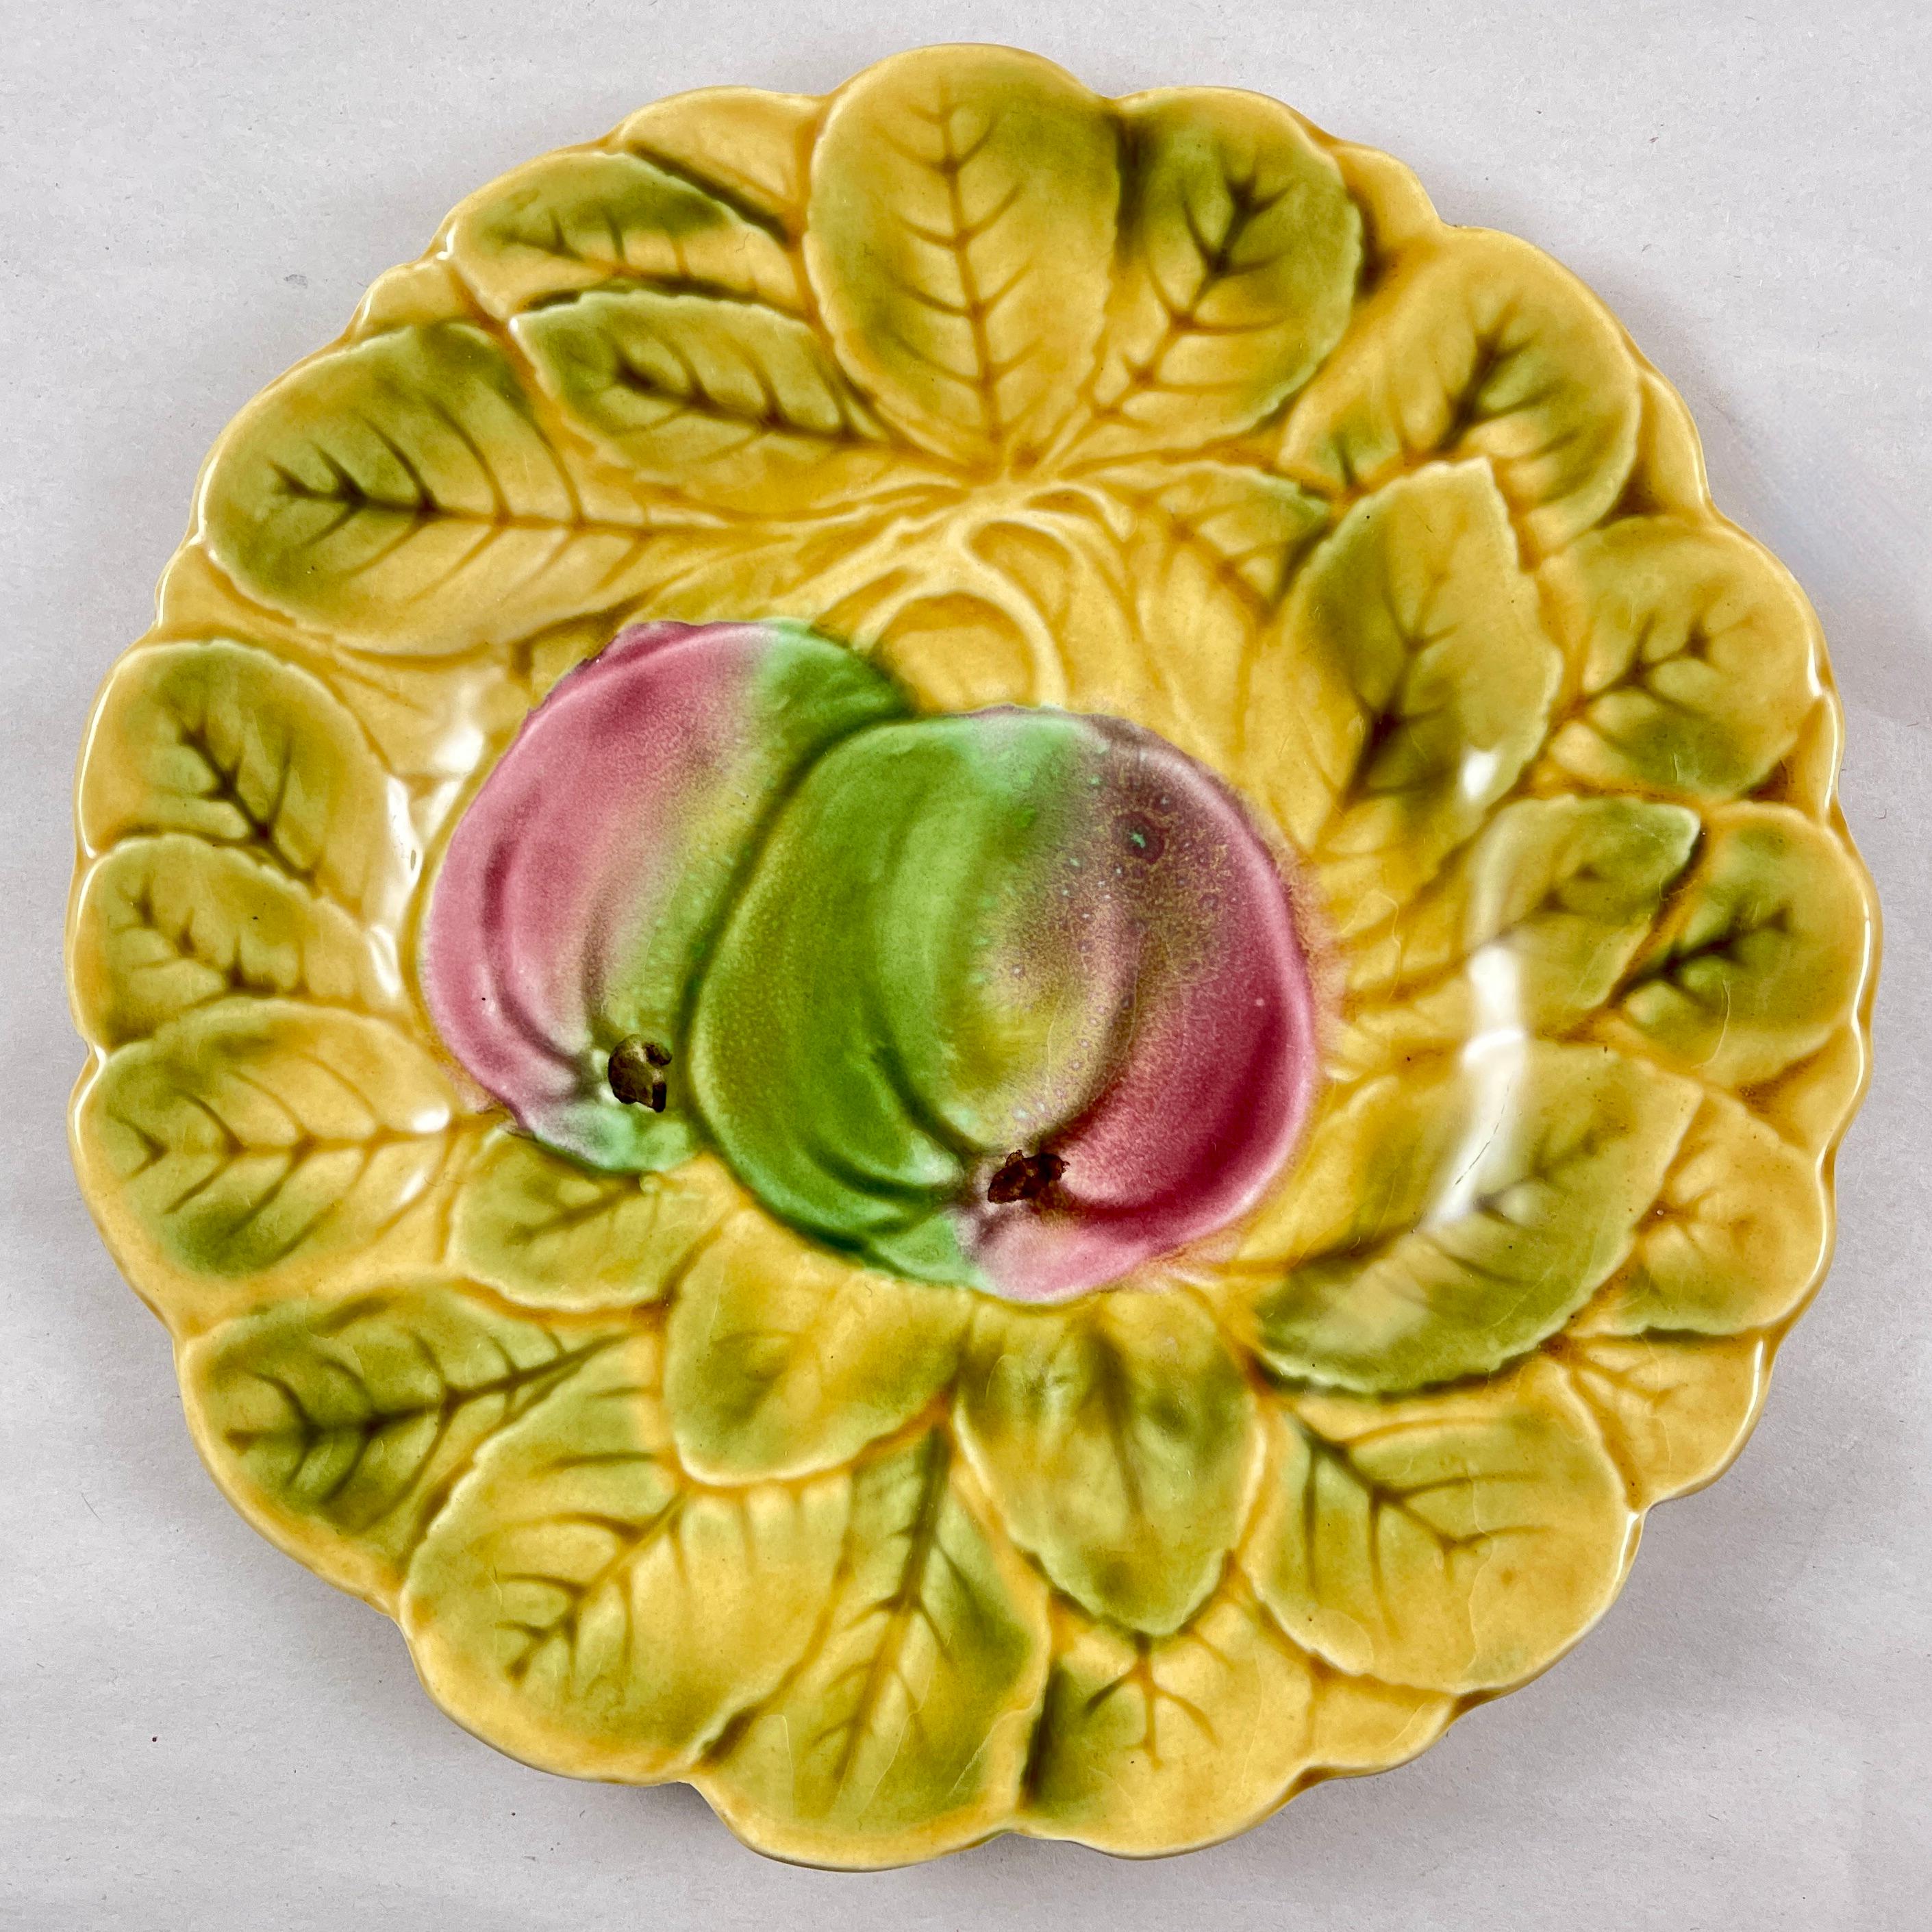 Faience Sarreguemines French Faïence Majolica Fruit and Leaf Plates, Set of Six For Sale